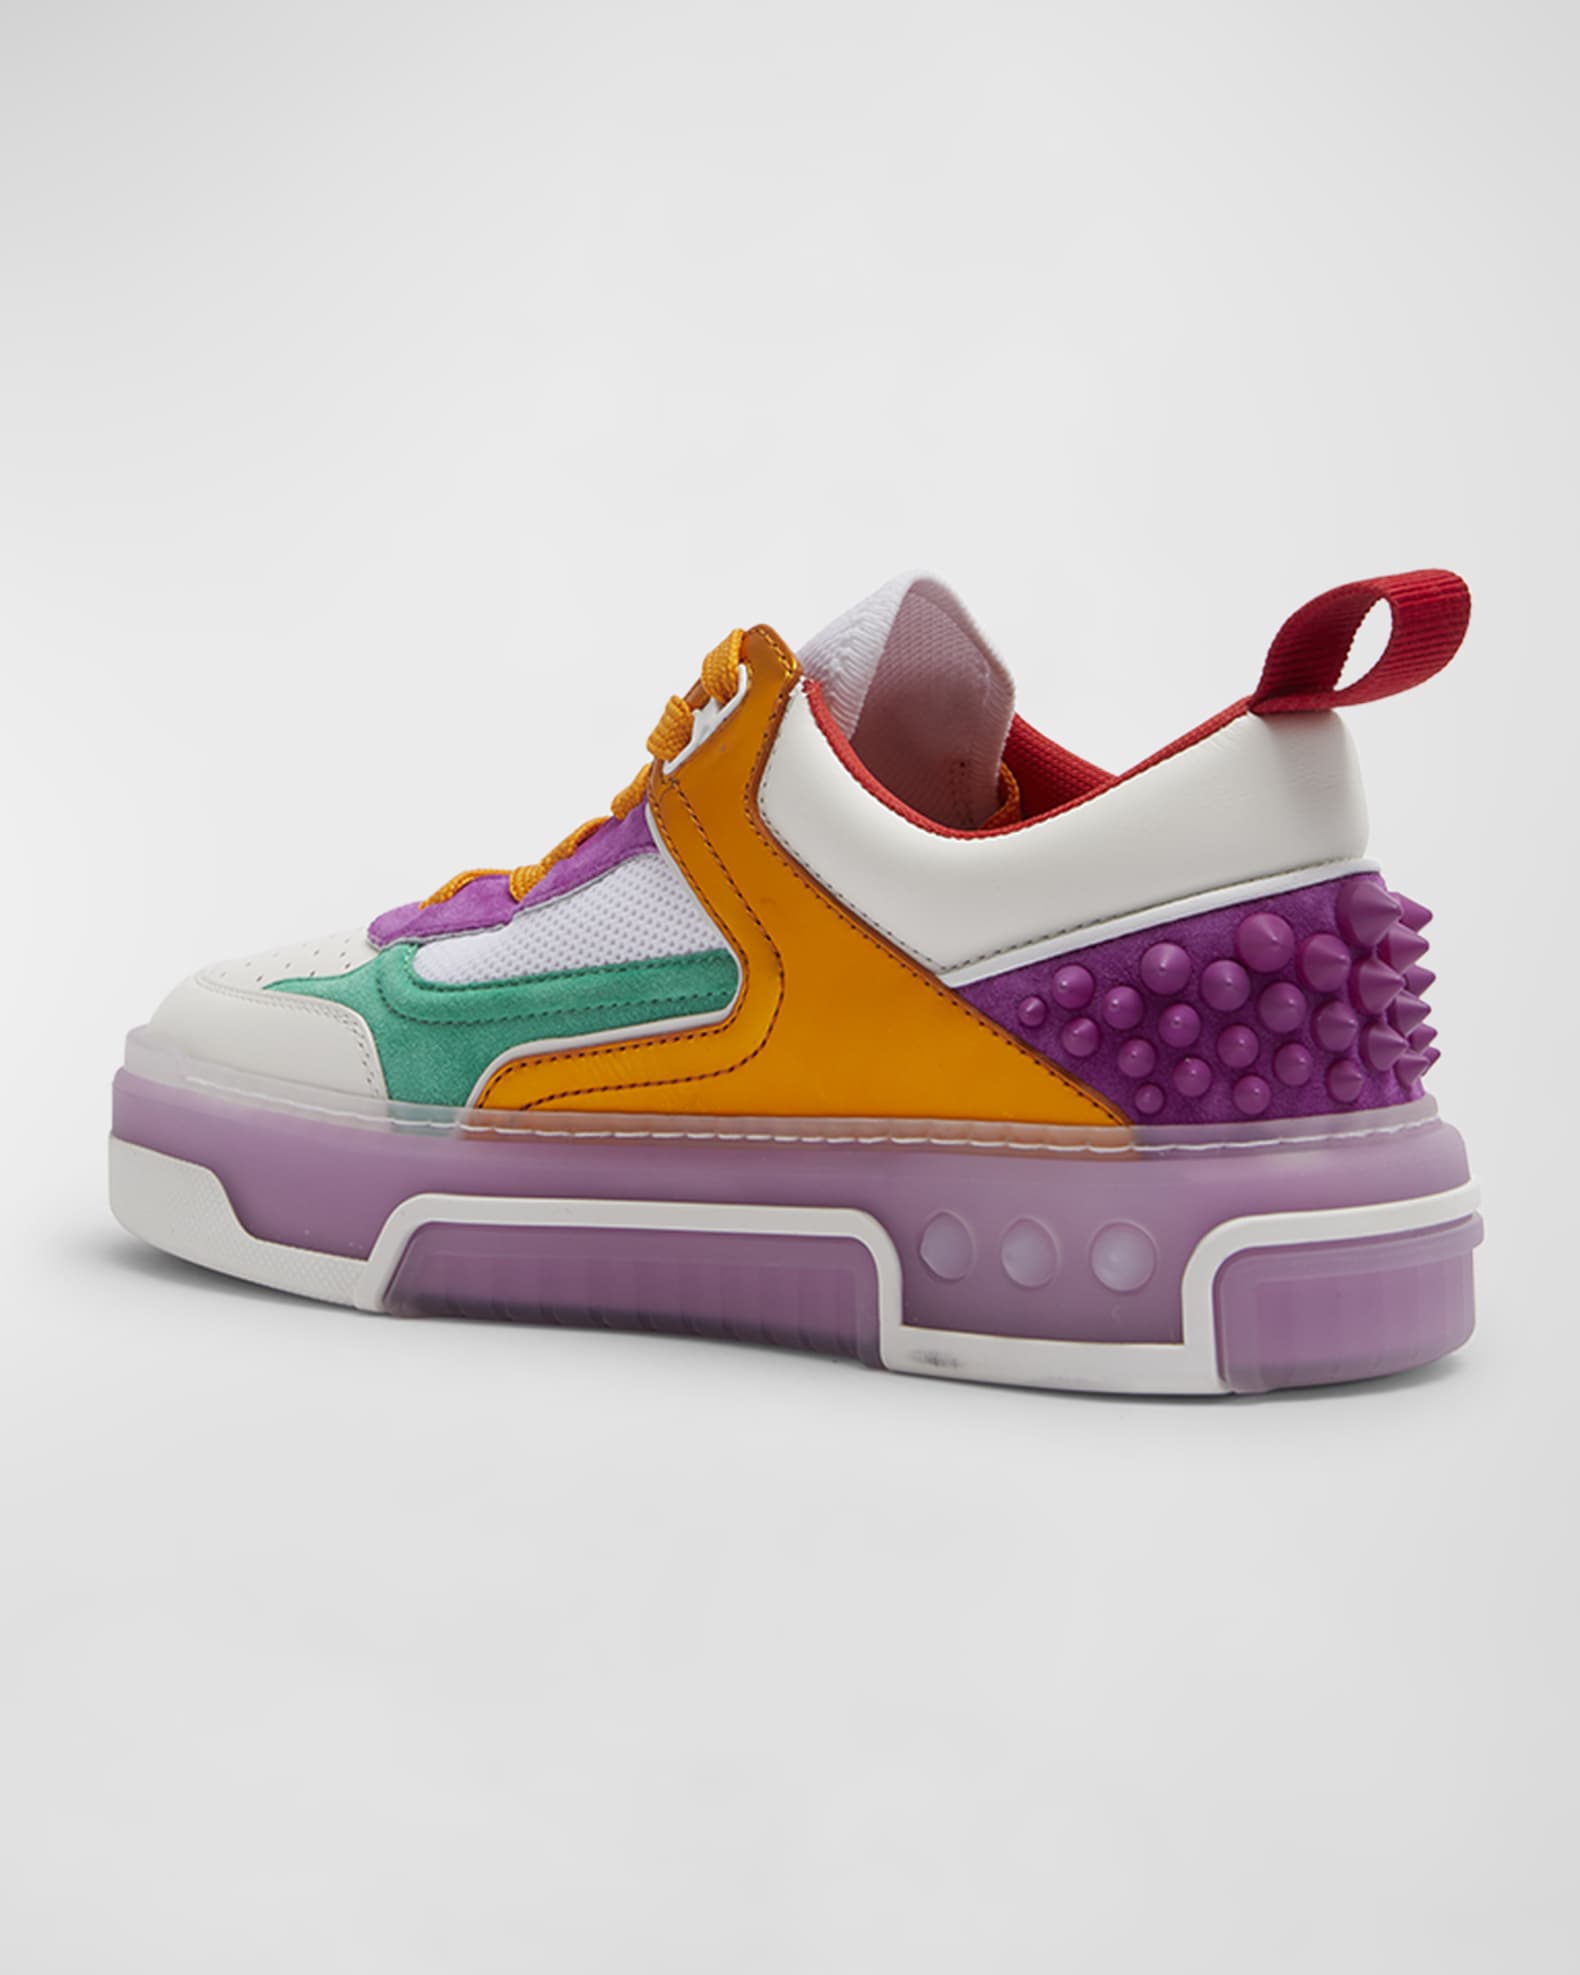 Christian Louboutin Astroloubi Donna Multicolor Spike Low-Top Sneakers ...